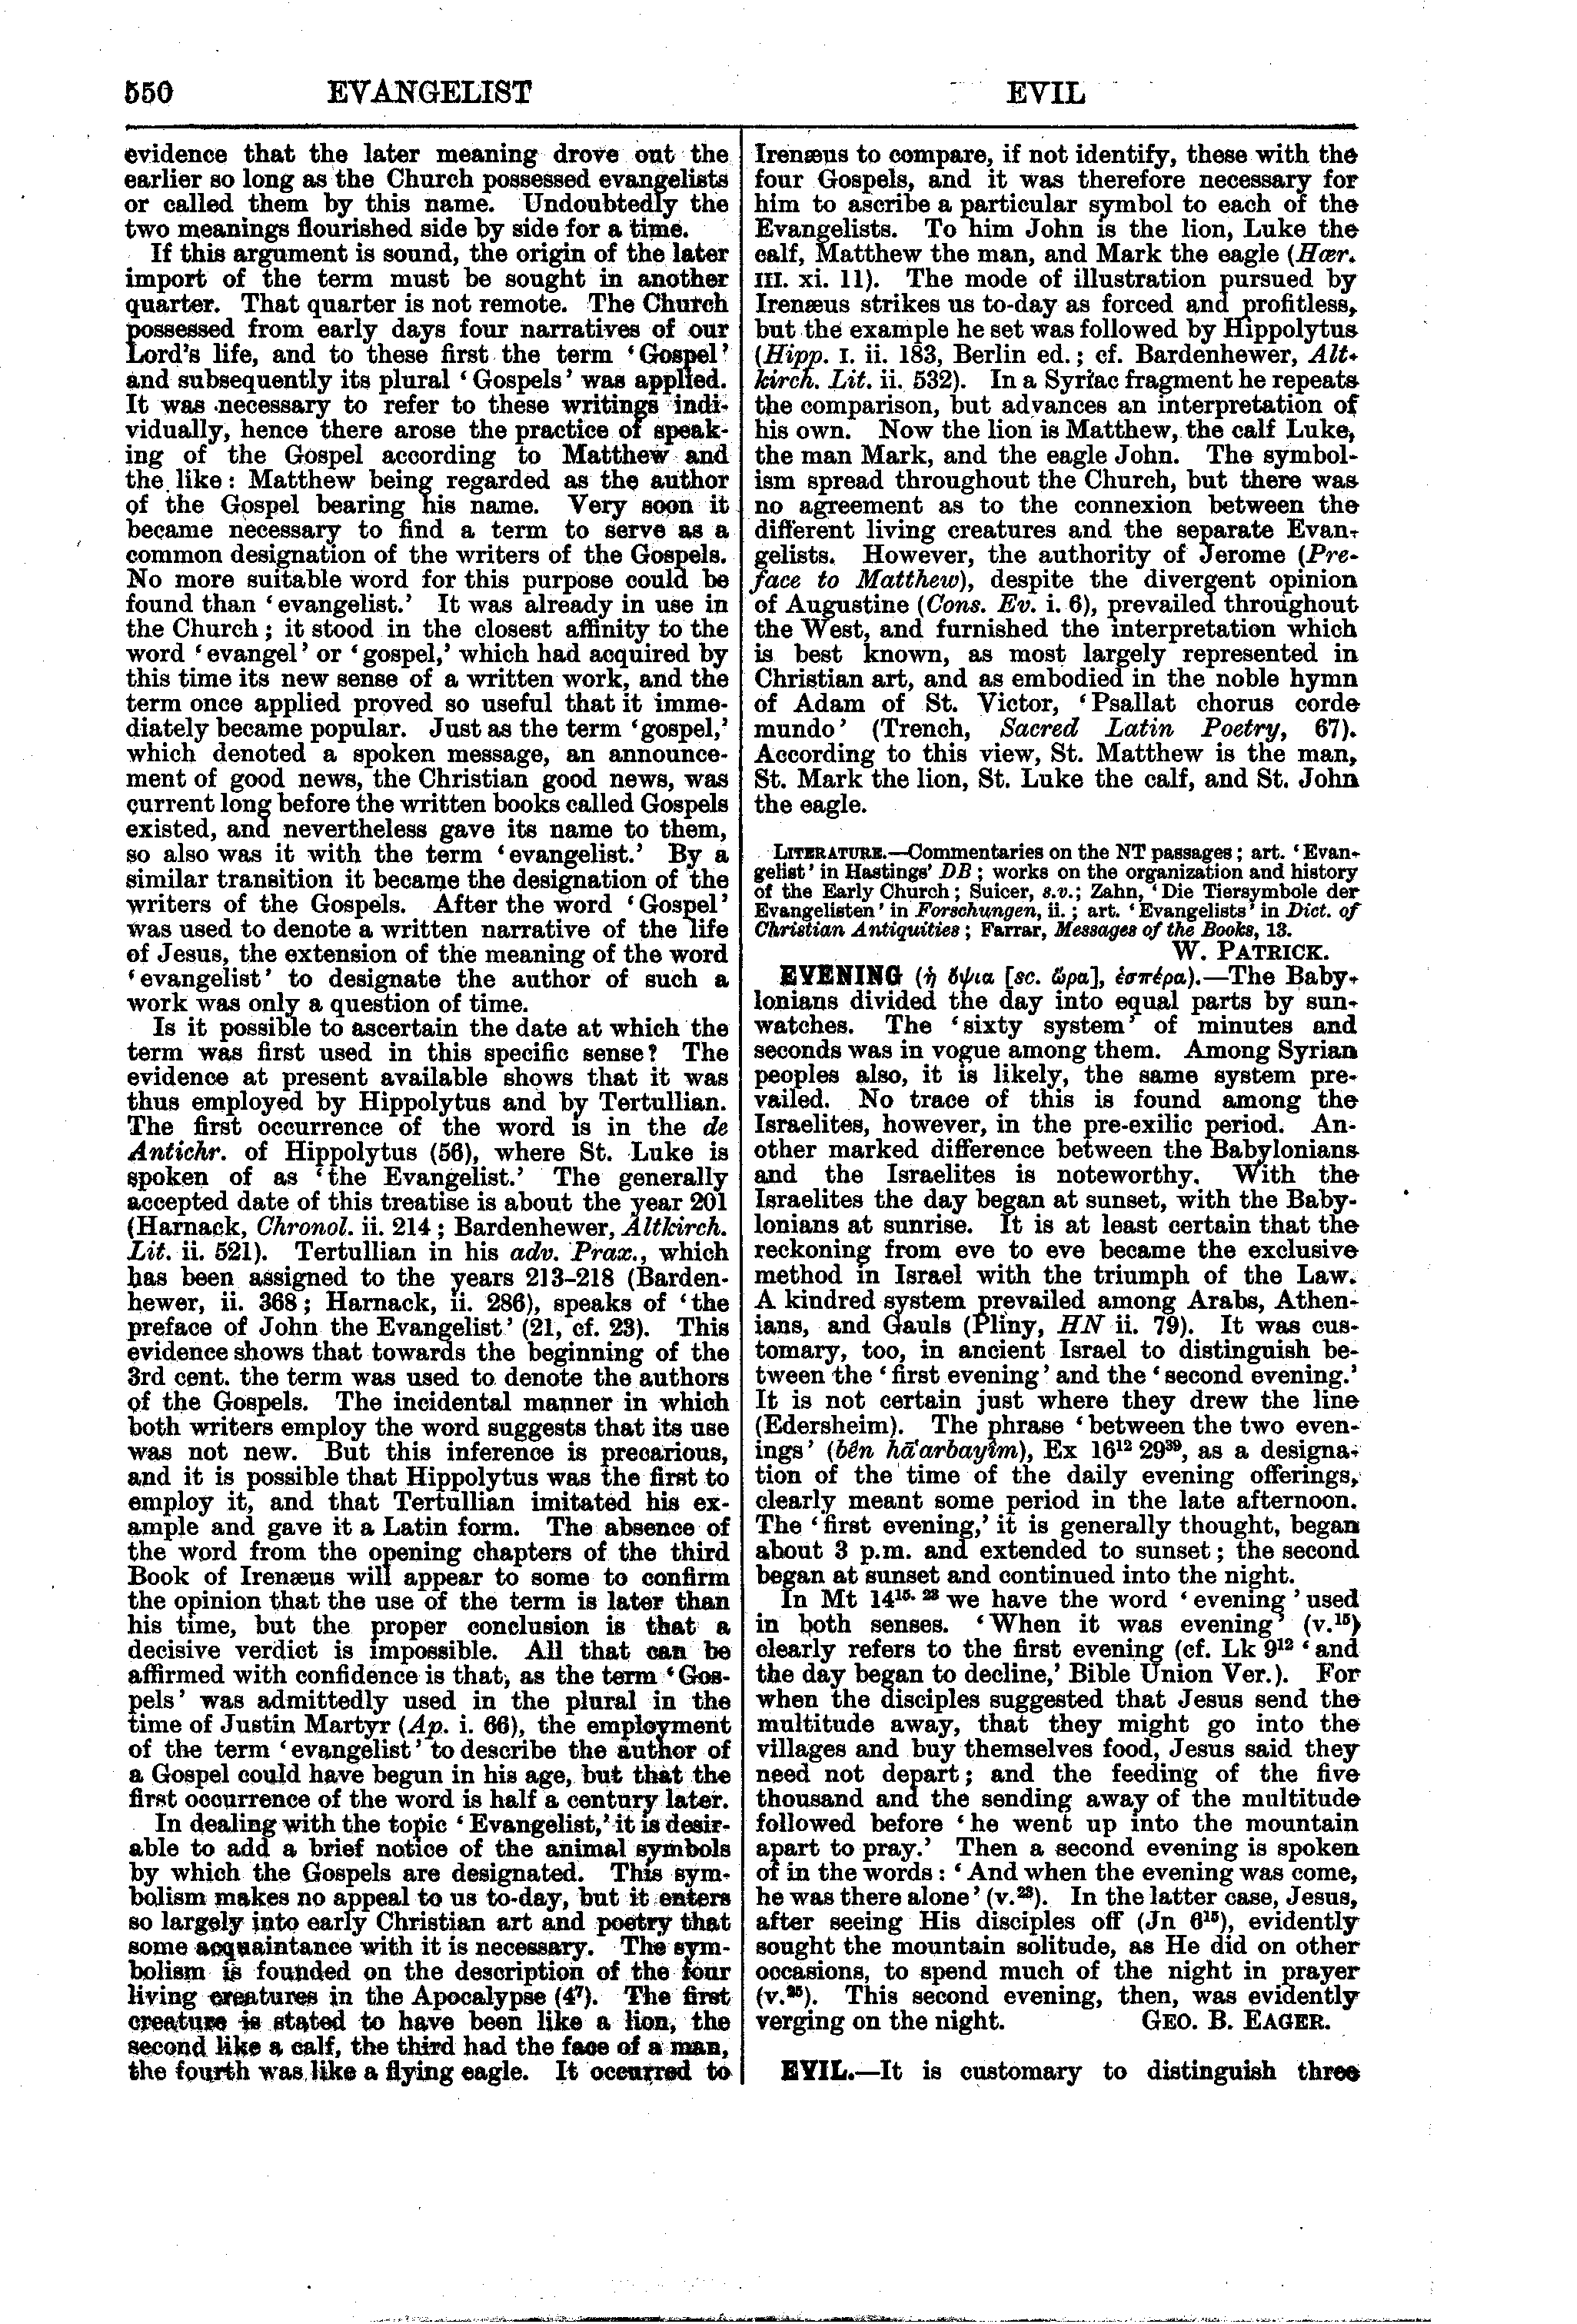 Image of page 550